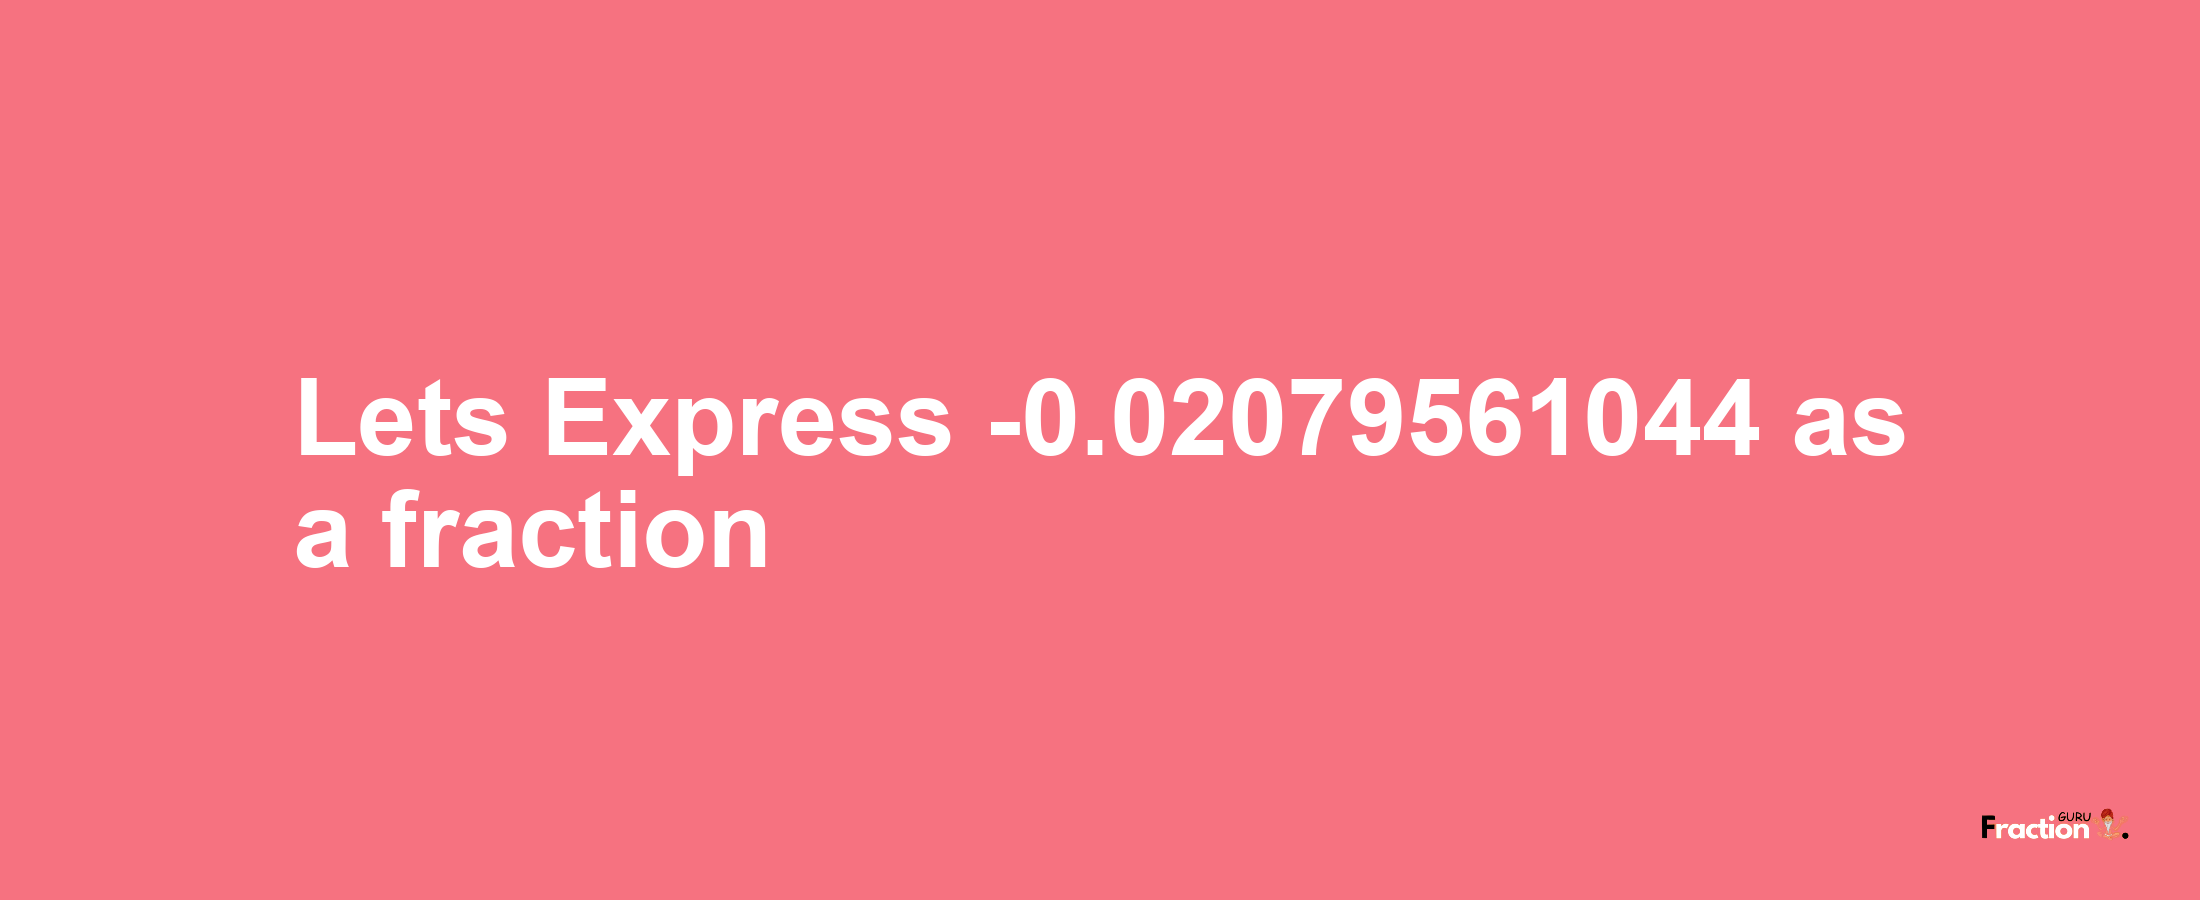 Lets Express -0.02079561044 as afraction